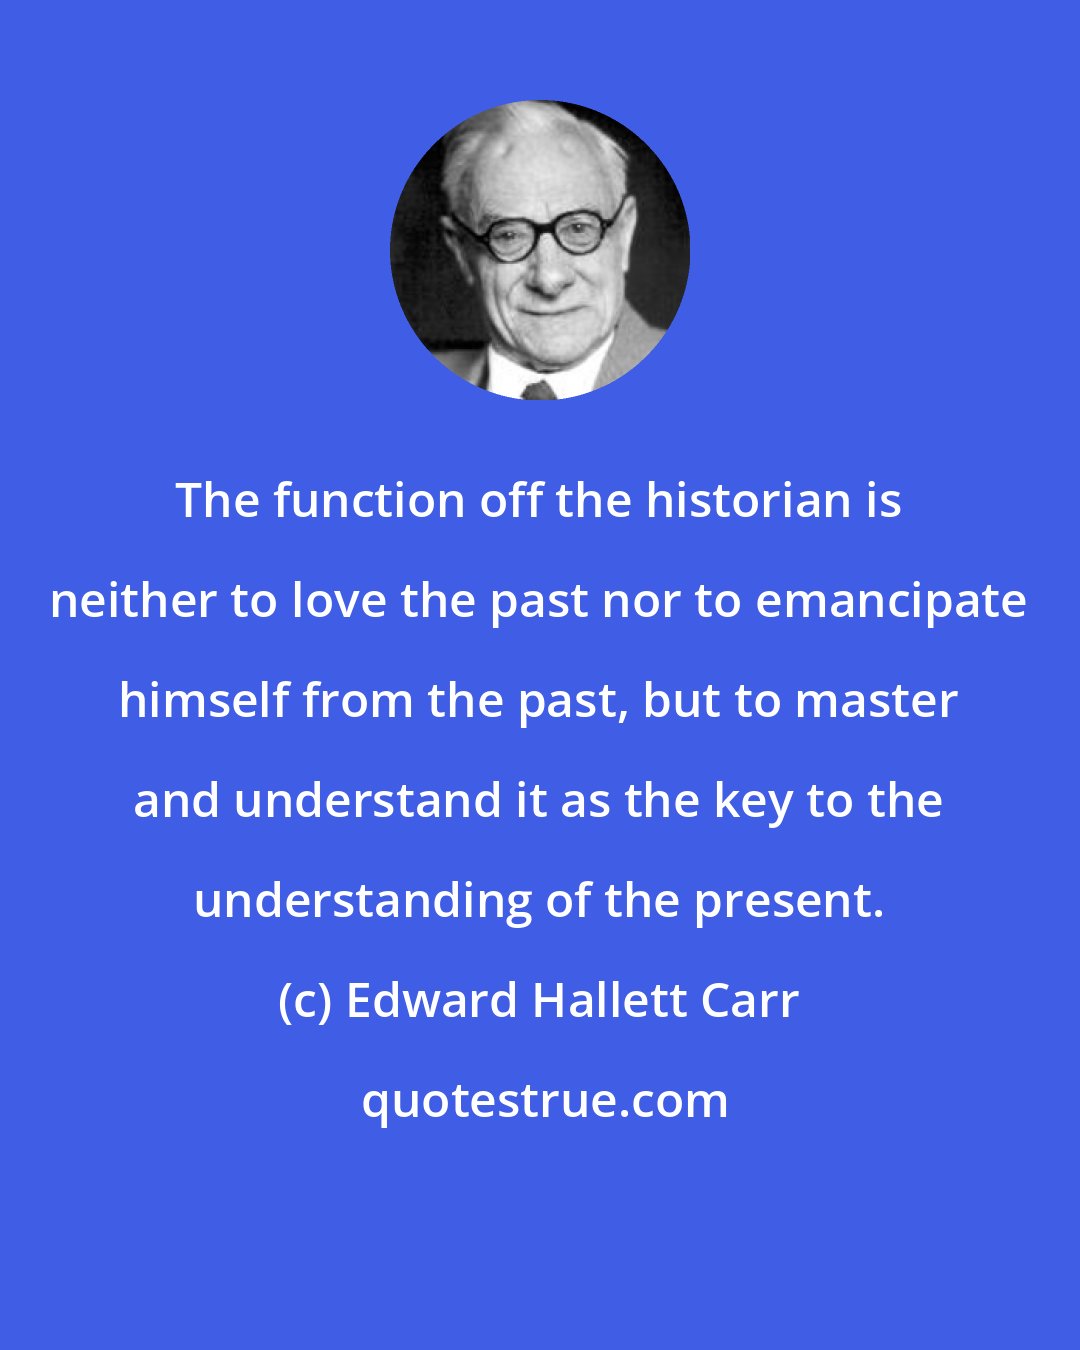 Edward Hallett Carr: The function off the historian is neither to love the past nor to emancipate himself from the past, but to master and understand it as the key to the understanding of the present.